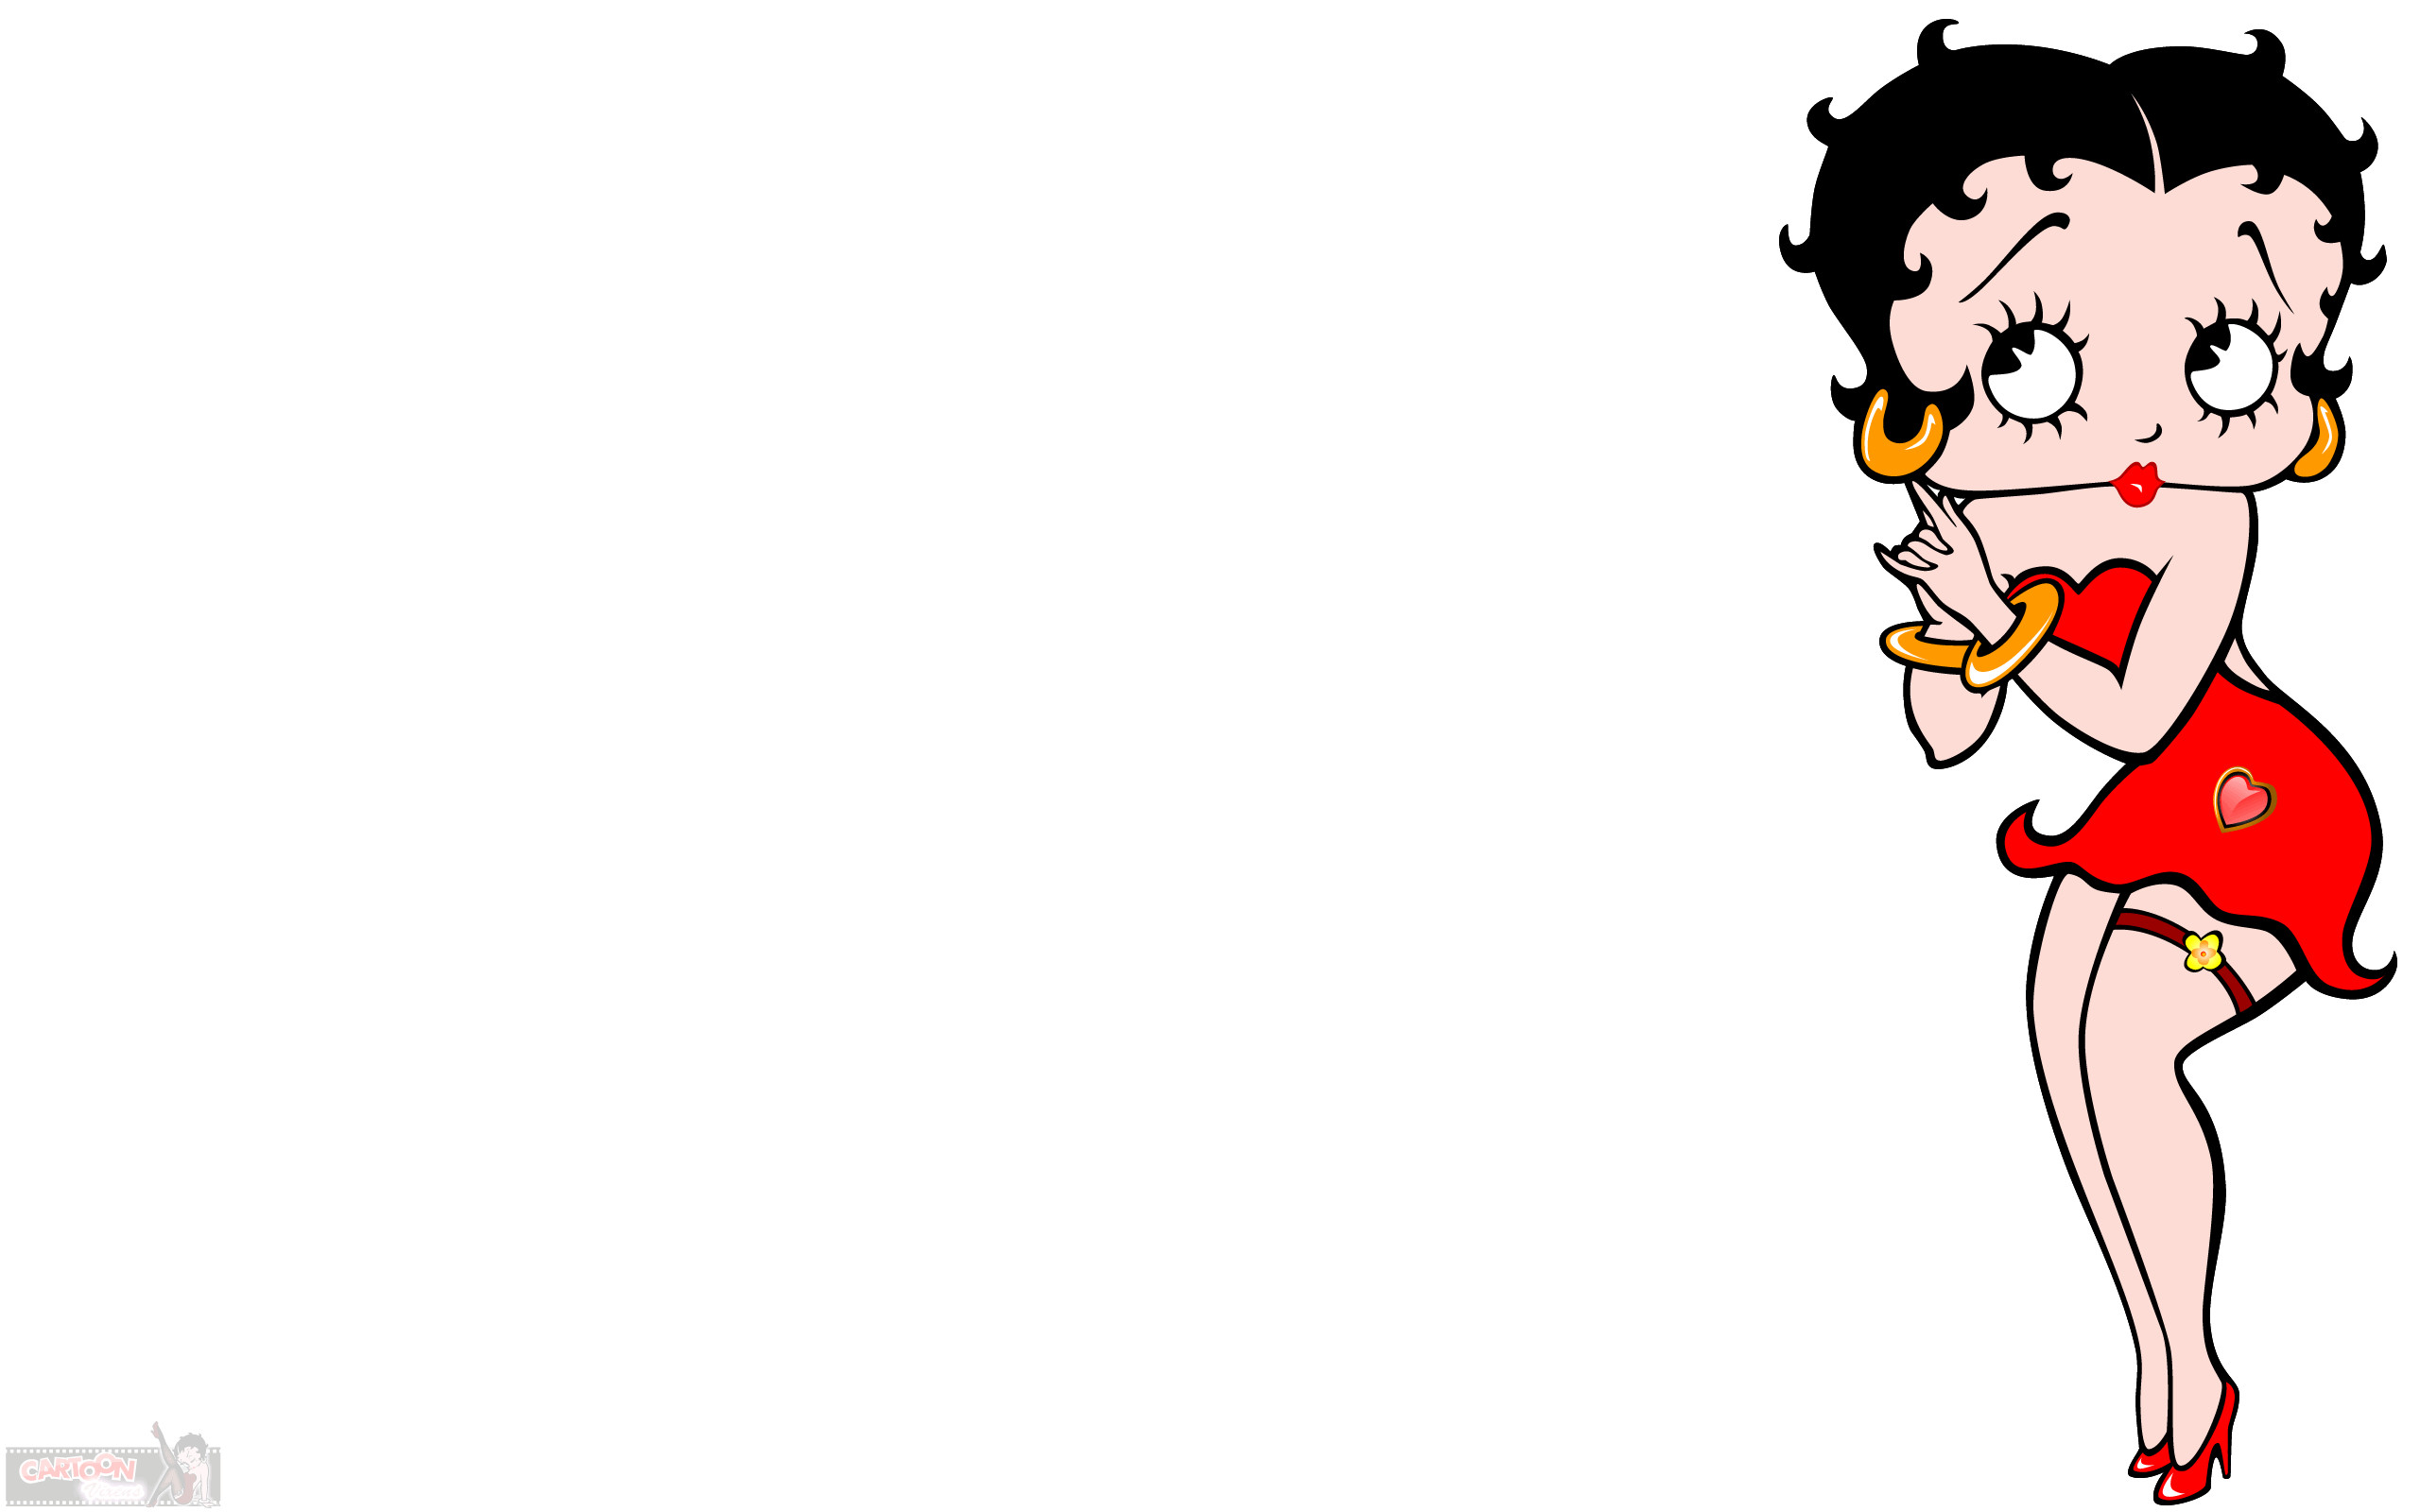 Betty Boop Wallpaper For Computer 51 Images